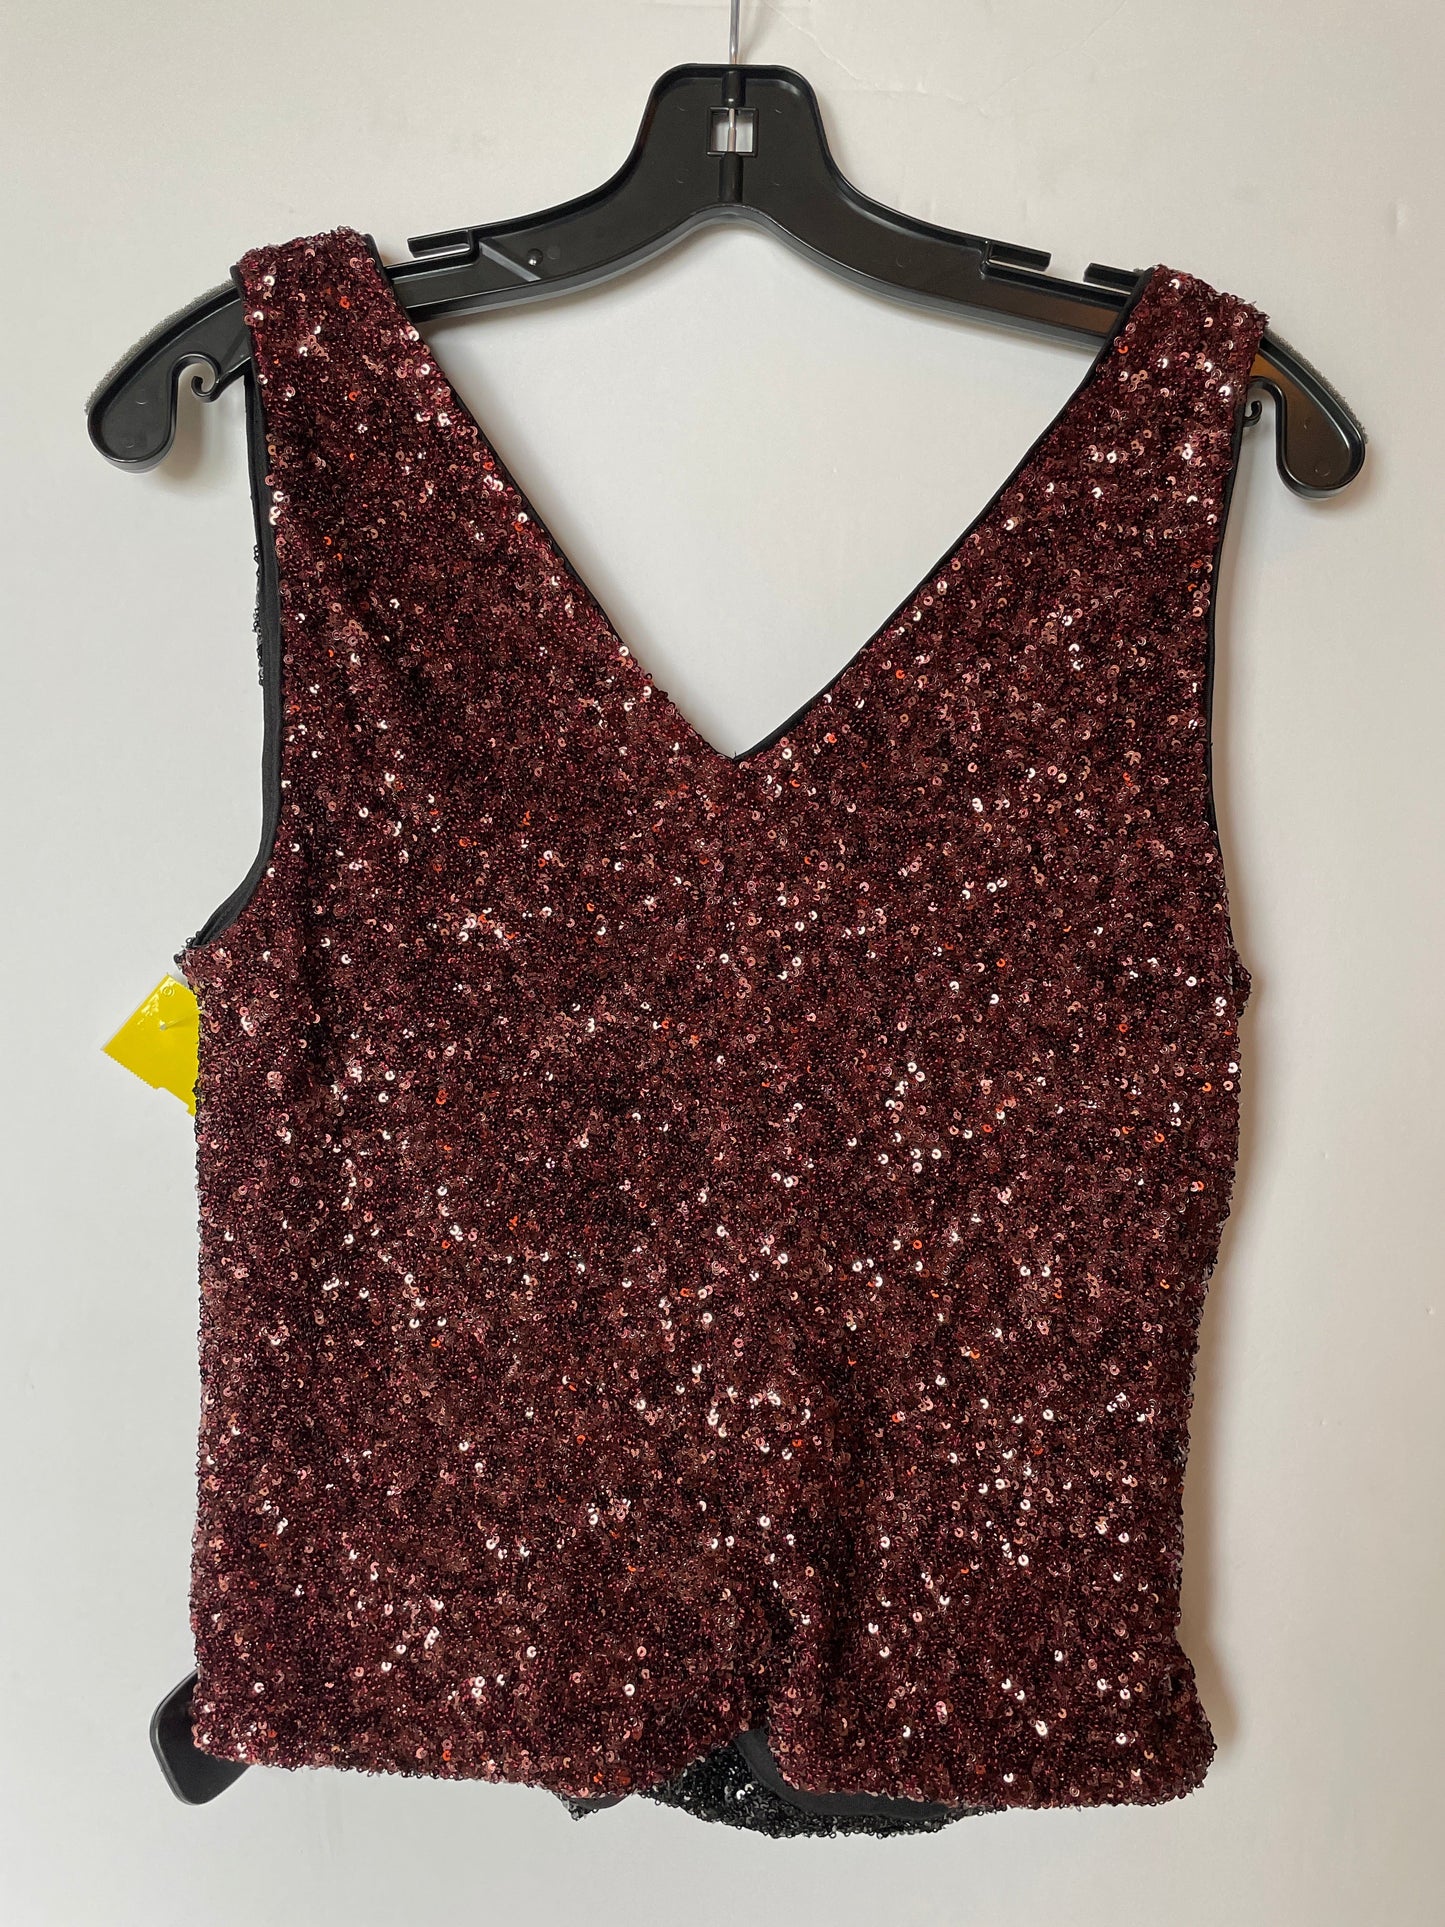 Black & Red Top Sleeveless Express, Size M